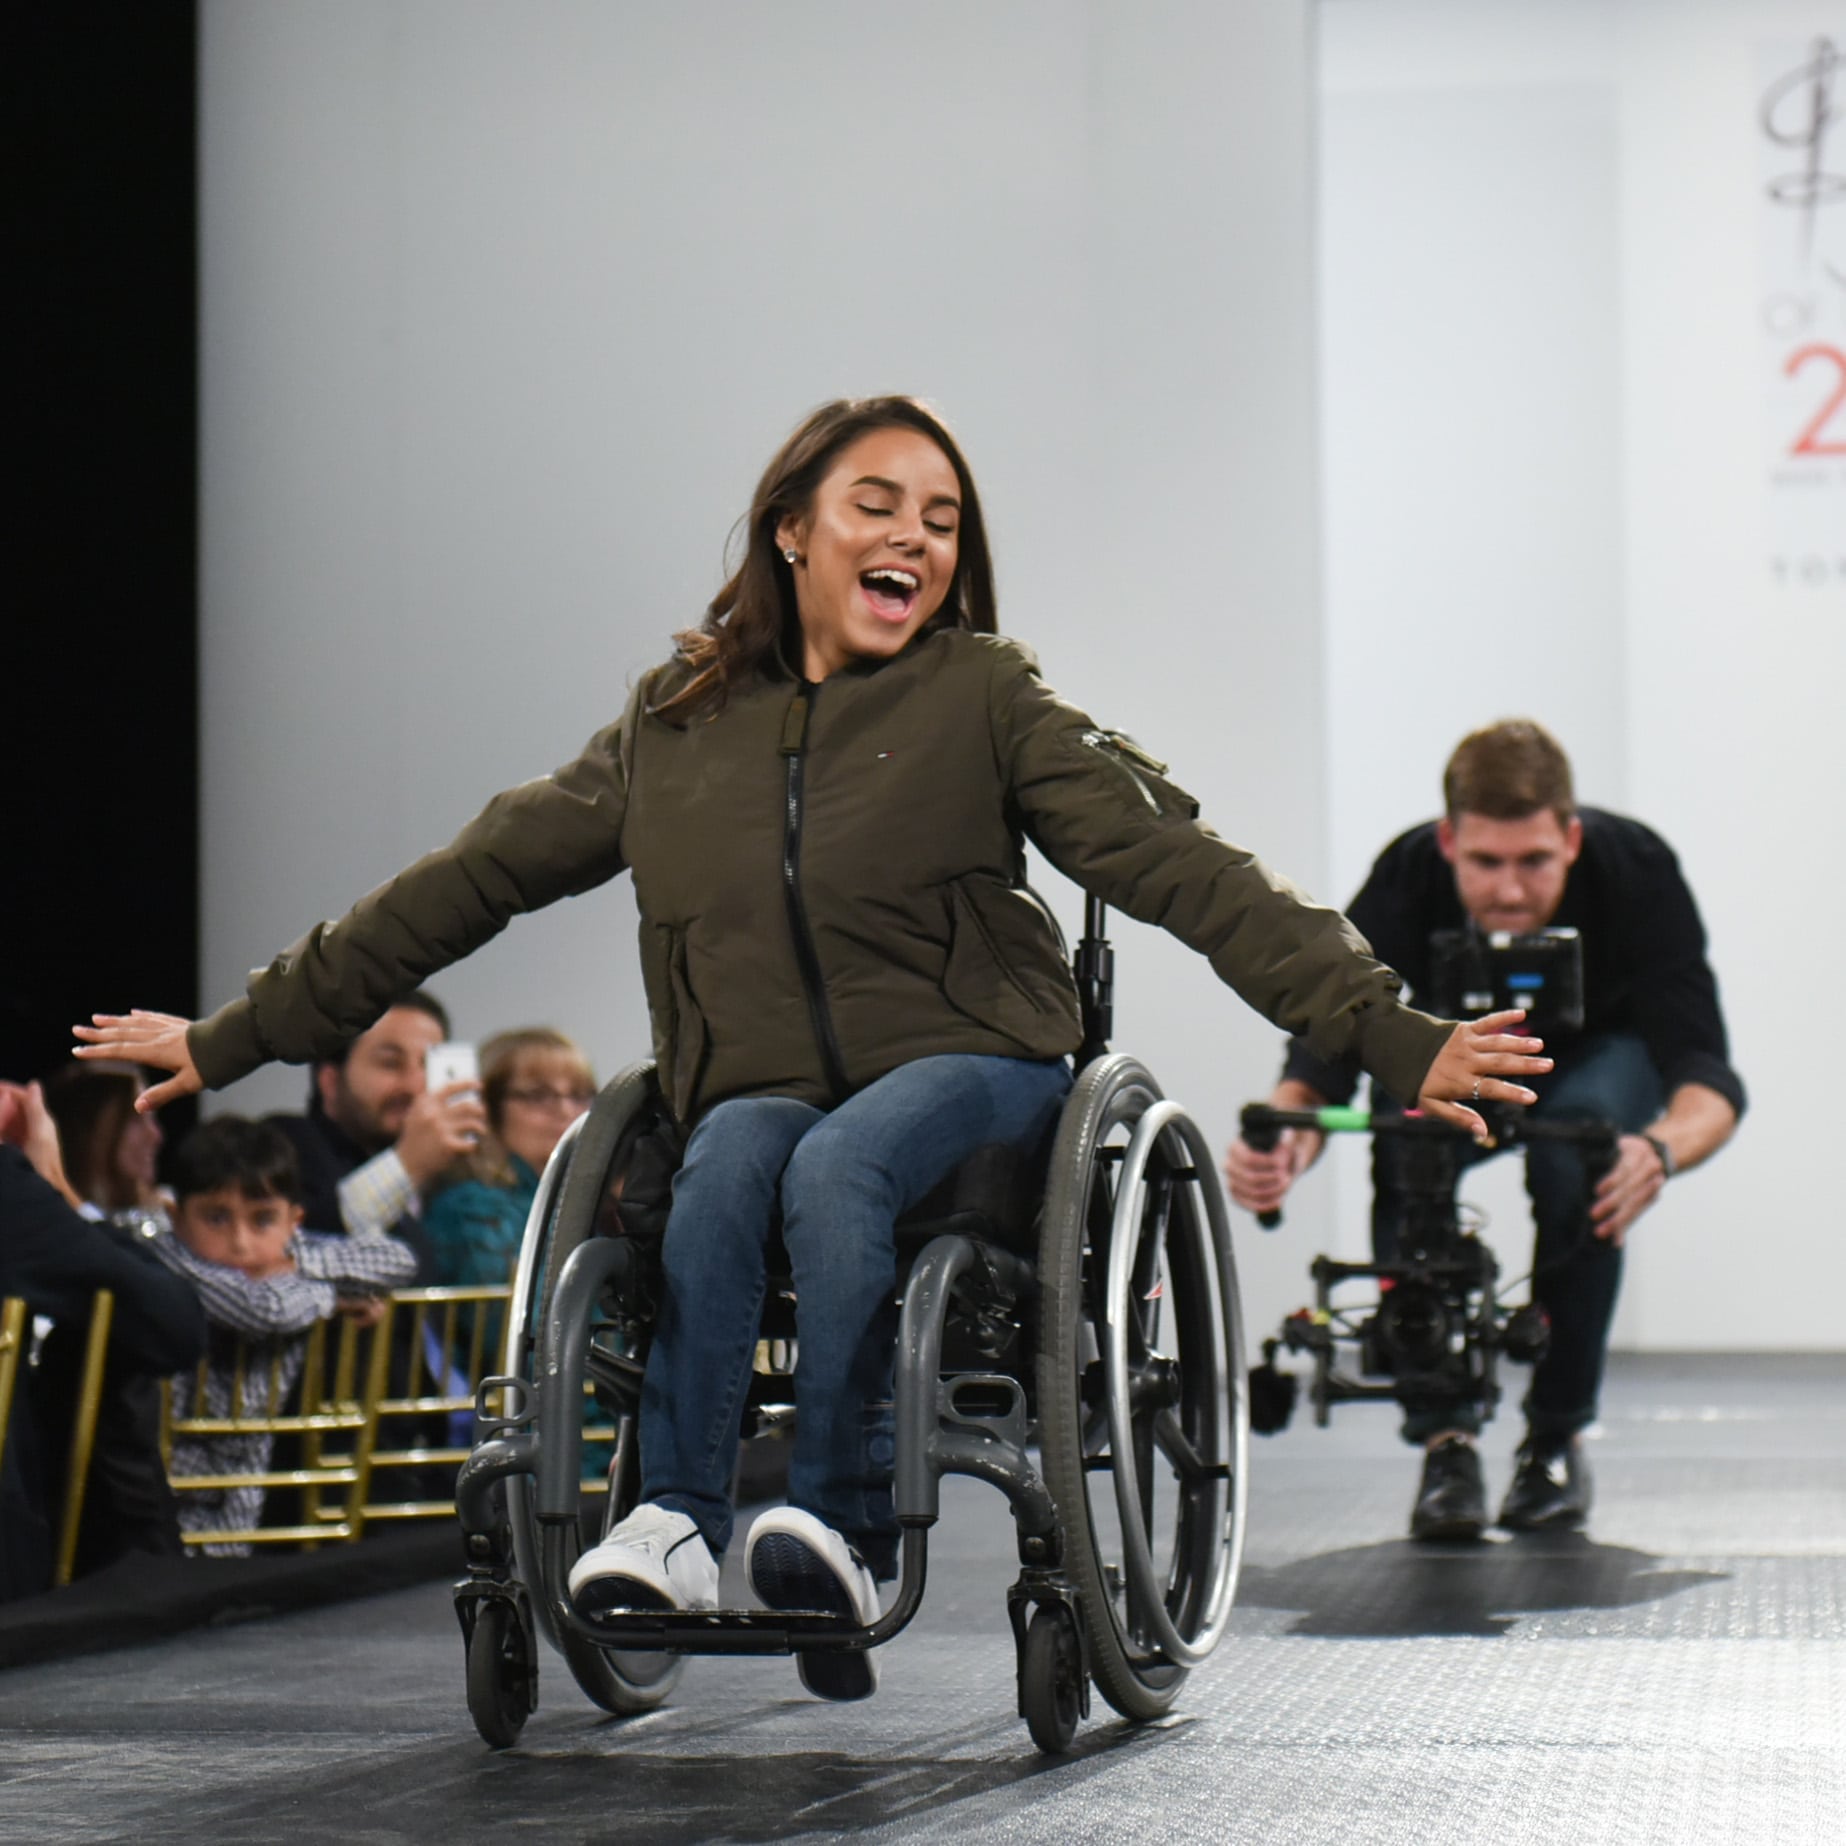 Tommy Hilfiger's Adaptive Clothing Line Offers Ease, Fashion to Clothes for  People With Disabilities